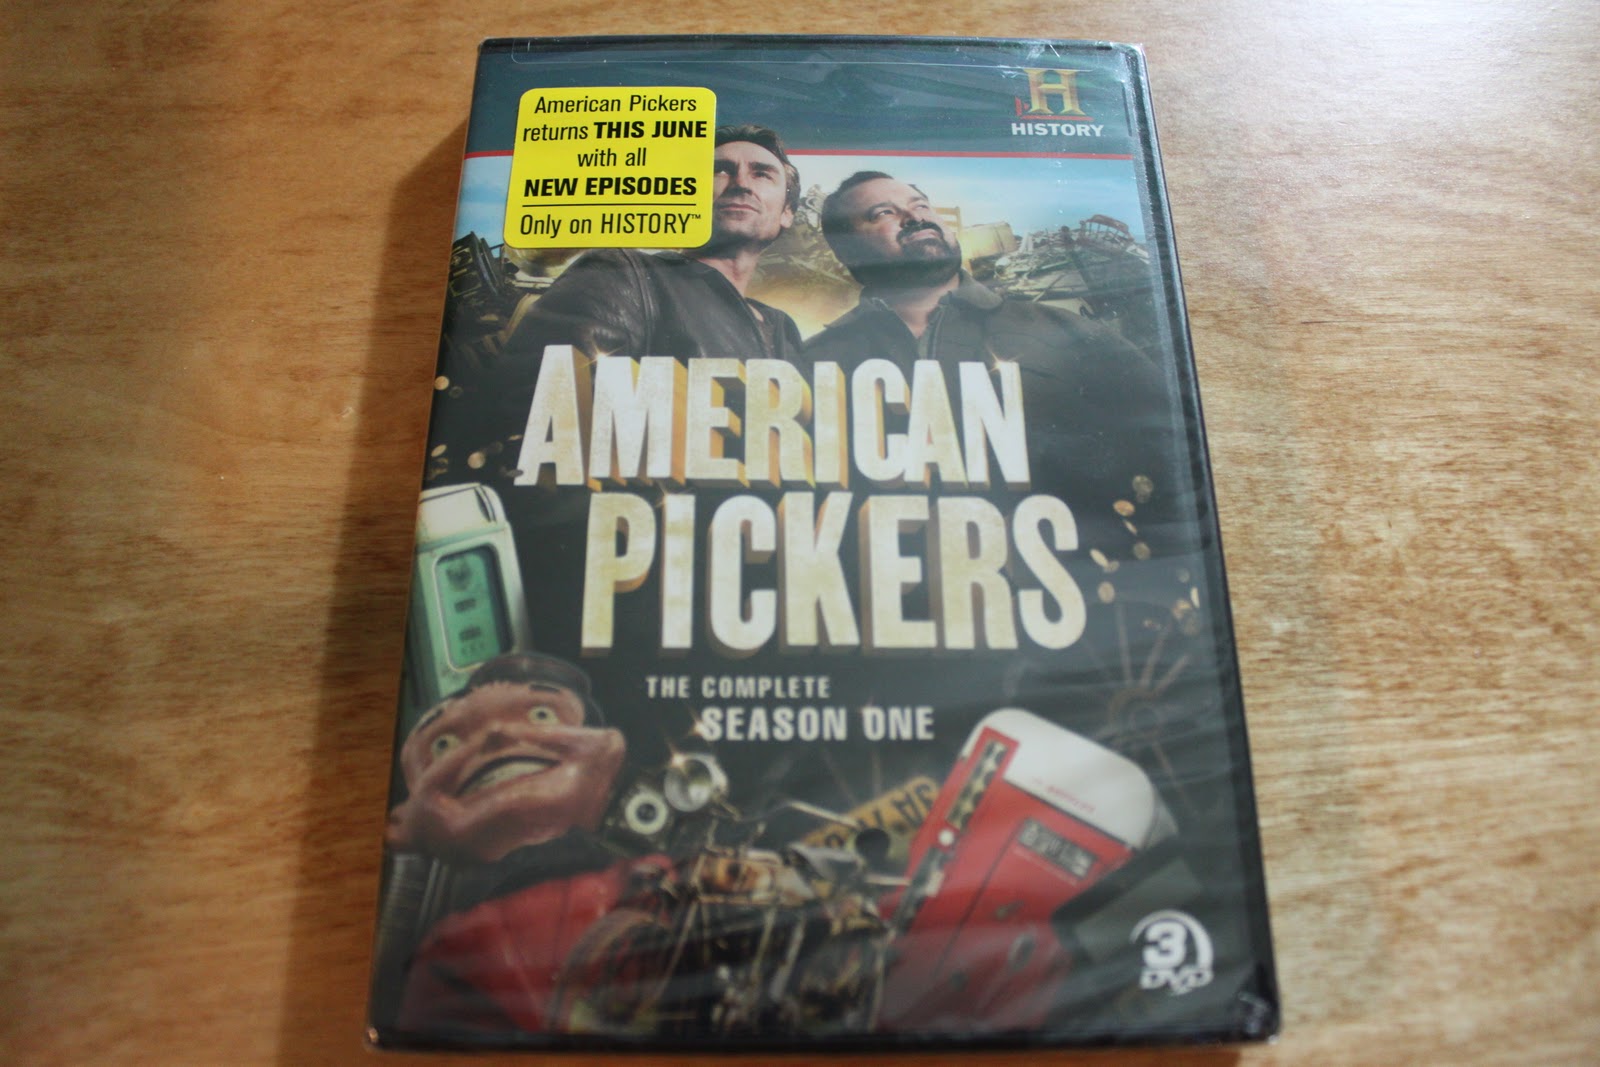 The American Pickers show